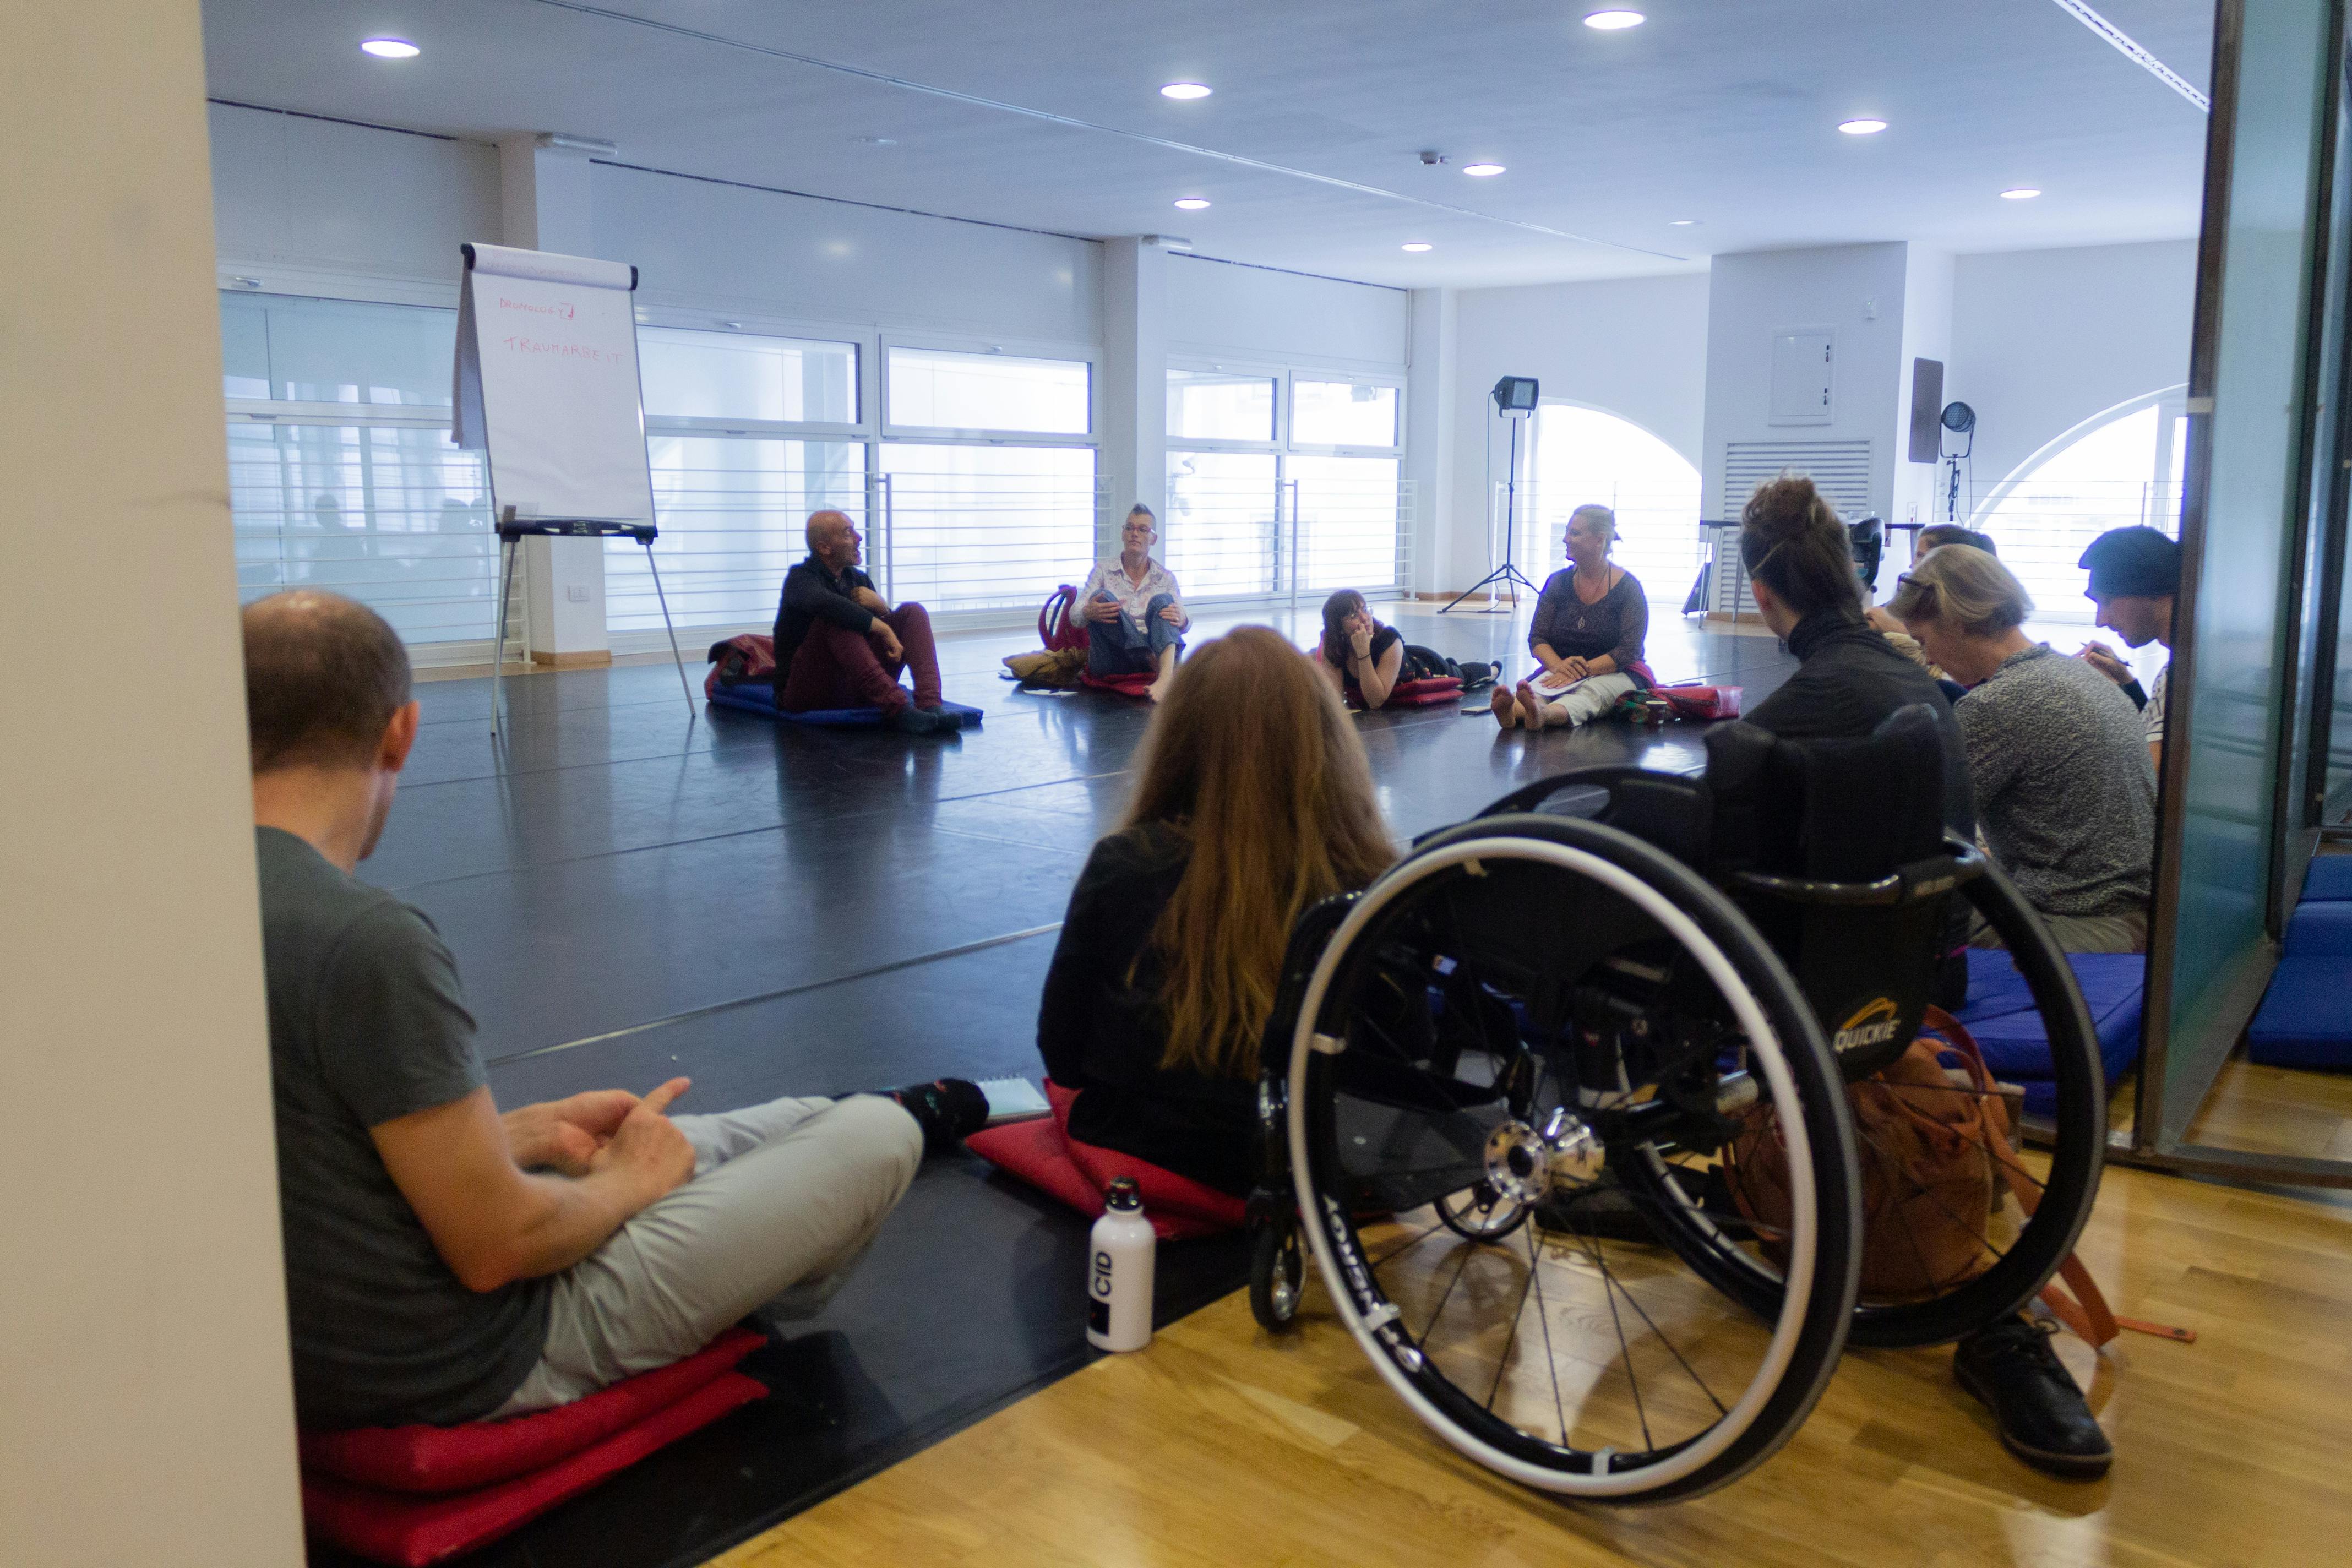 Dancers with and without disabilities during a workshop in the dance studios of Oriente Occidente Studio.